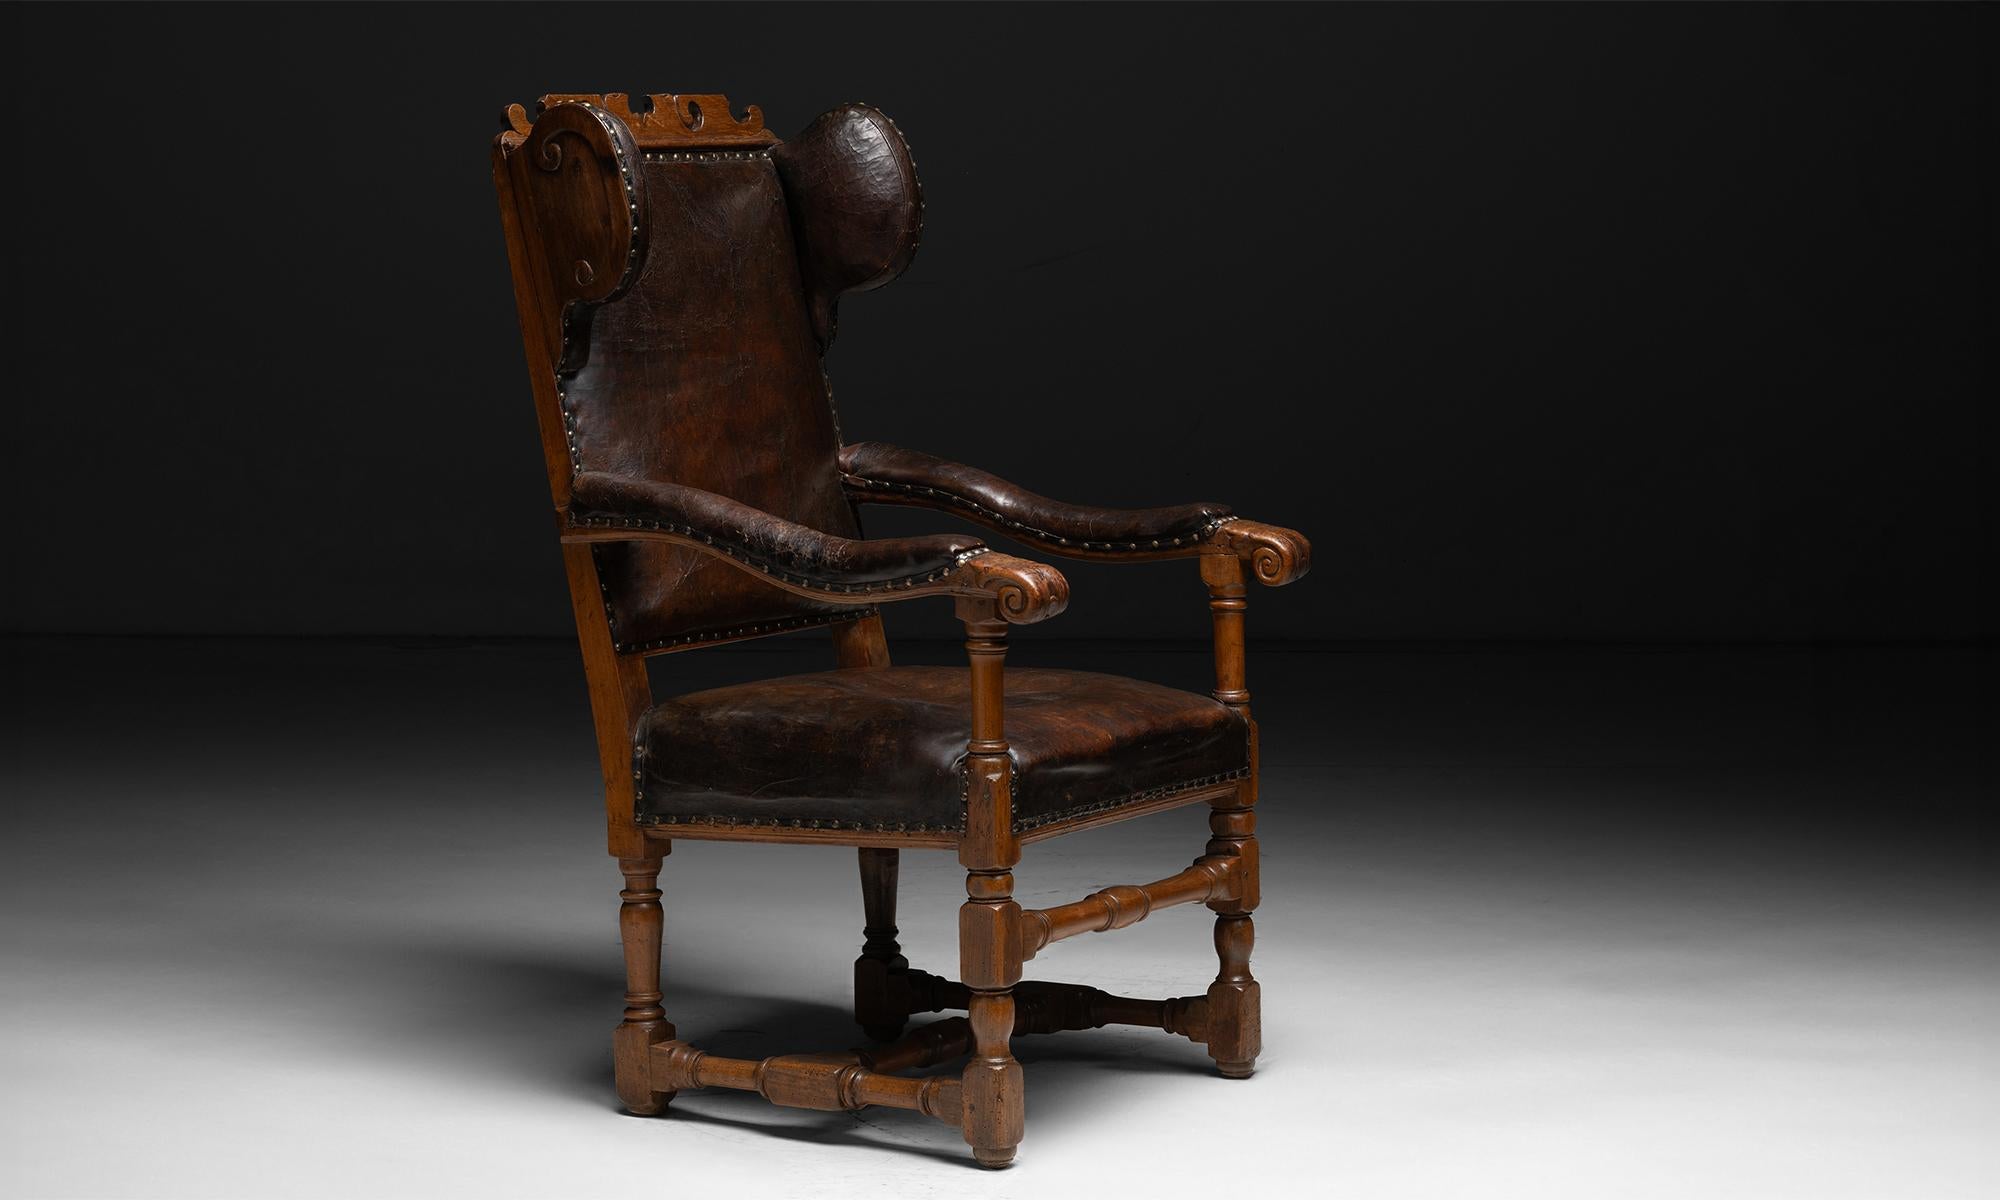 Leather Wingback Armchair

England, 1747

Wingback armchair with frame composed of elm and leather cushions. Brass rivets on surround of fabric, intricately carved balusters, and dated 